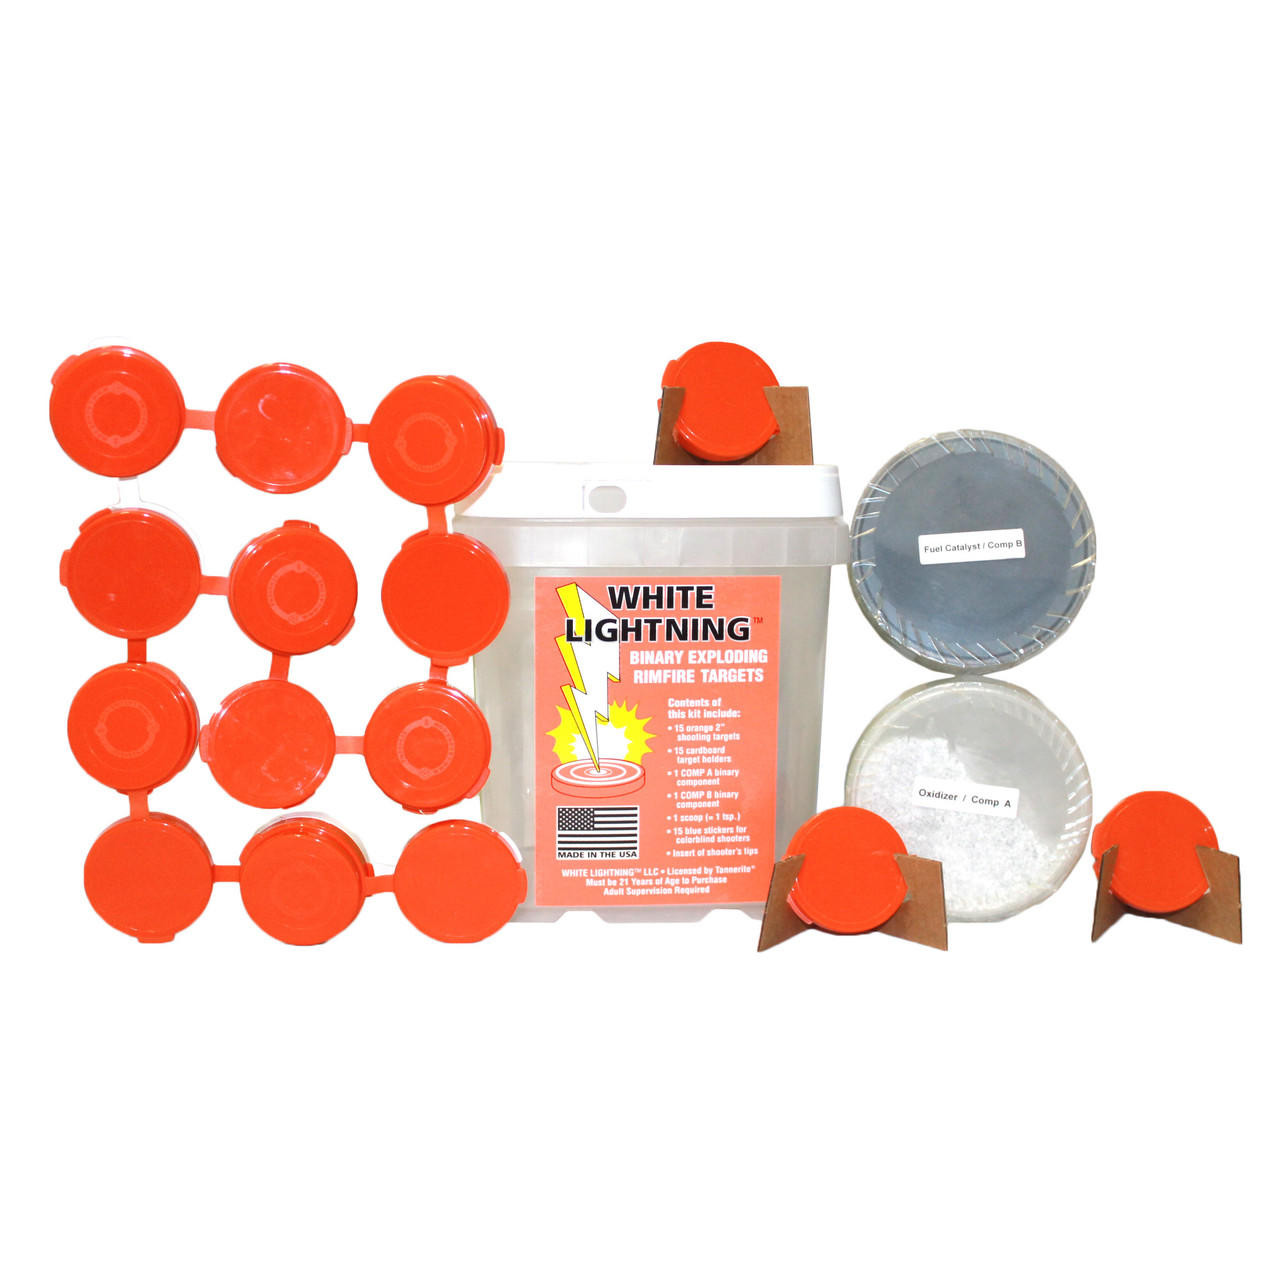 Tannerite, Sporting & Outdoor